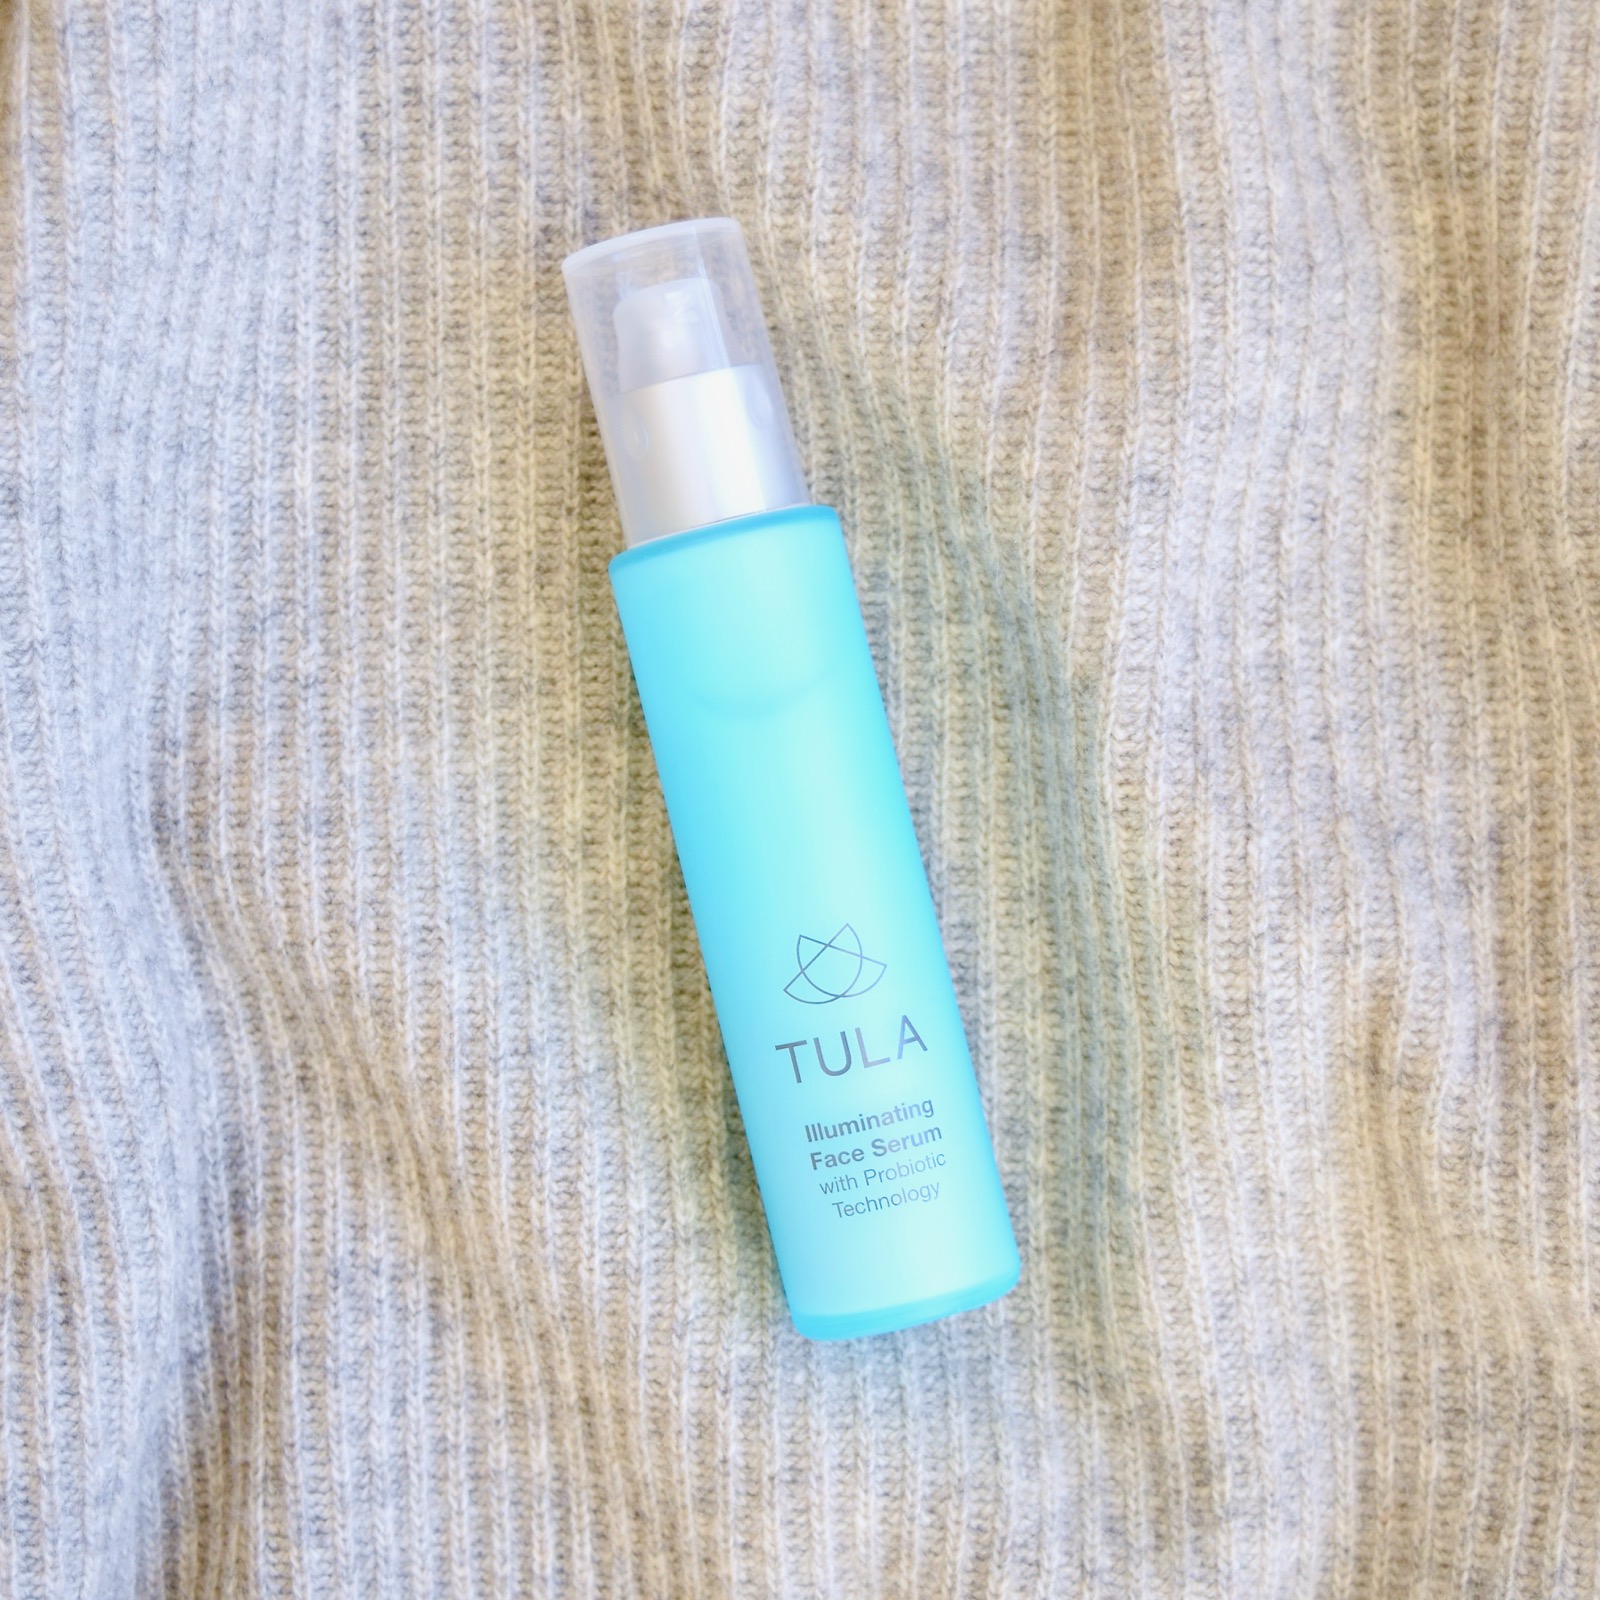 Tula Illuminating Face Serum with Probiotic Technology review